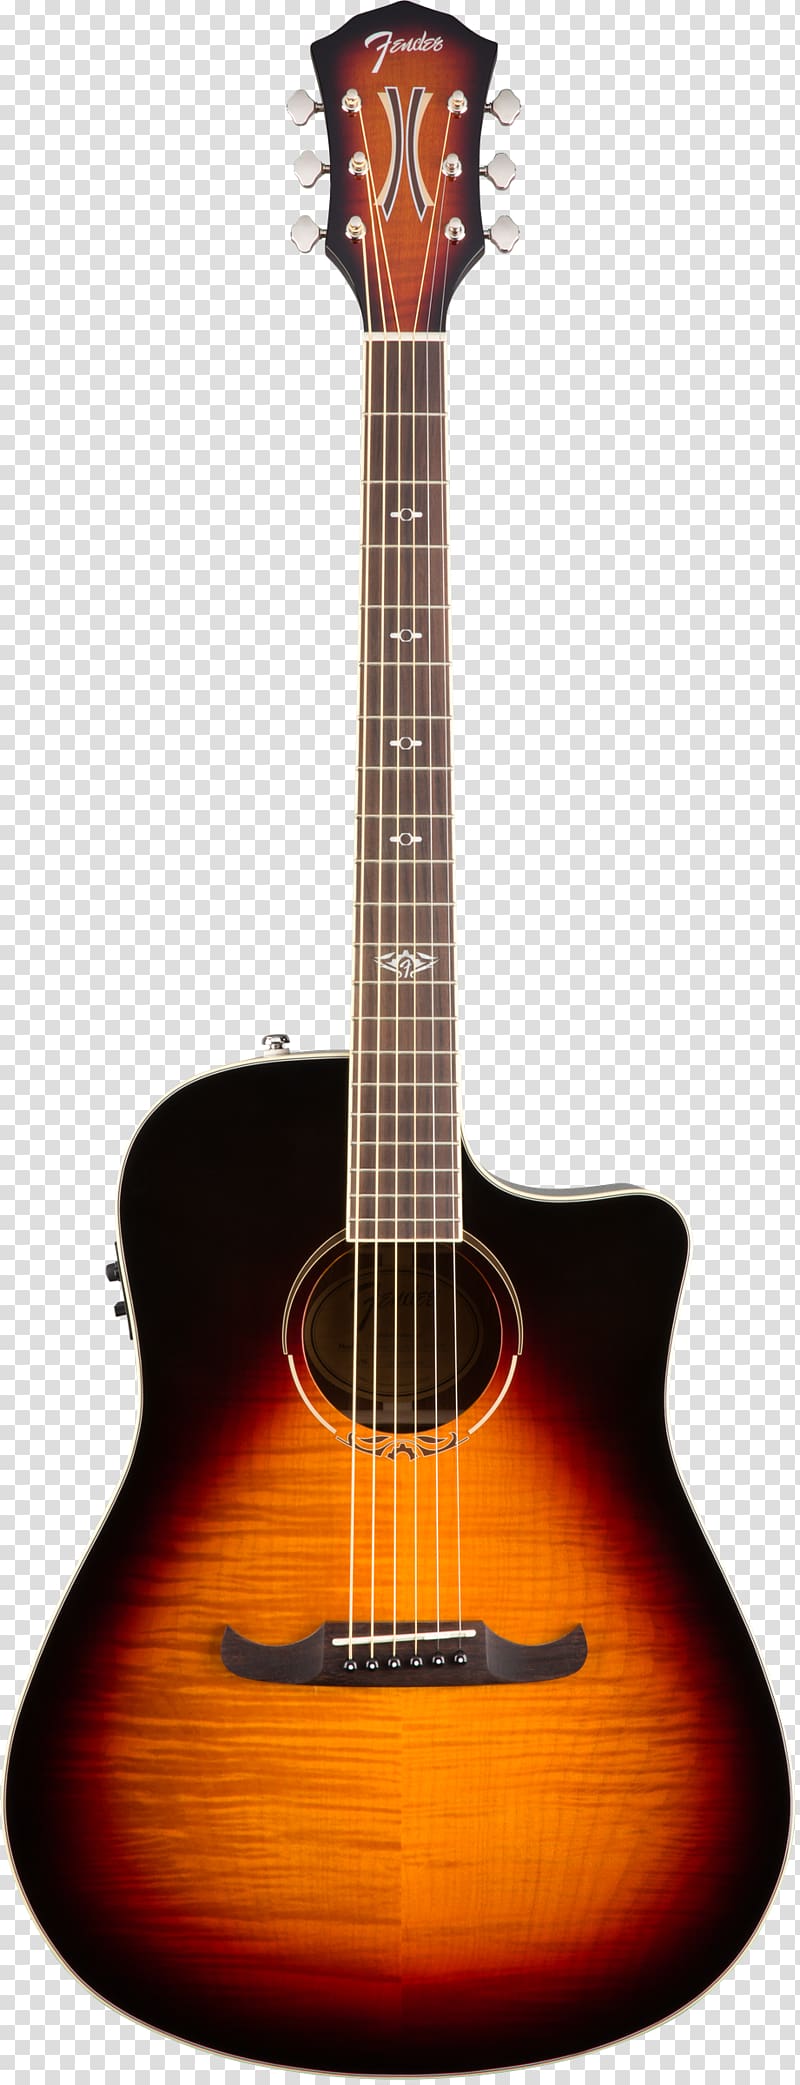 Fender T-Bucket 300 CE Acoustic-Electric Guitar Acoustic guitar Sunburst, Acoustic transparent background PNG clipart